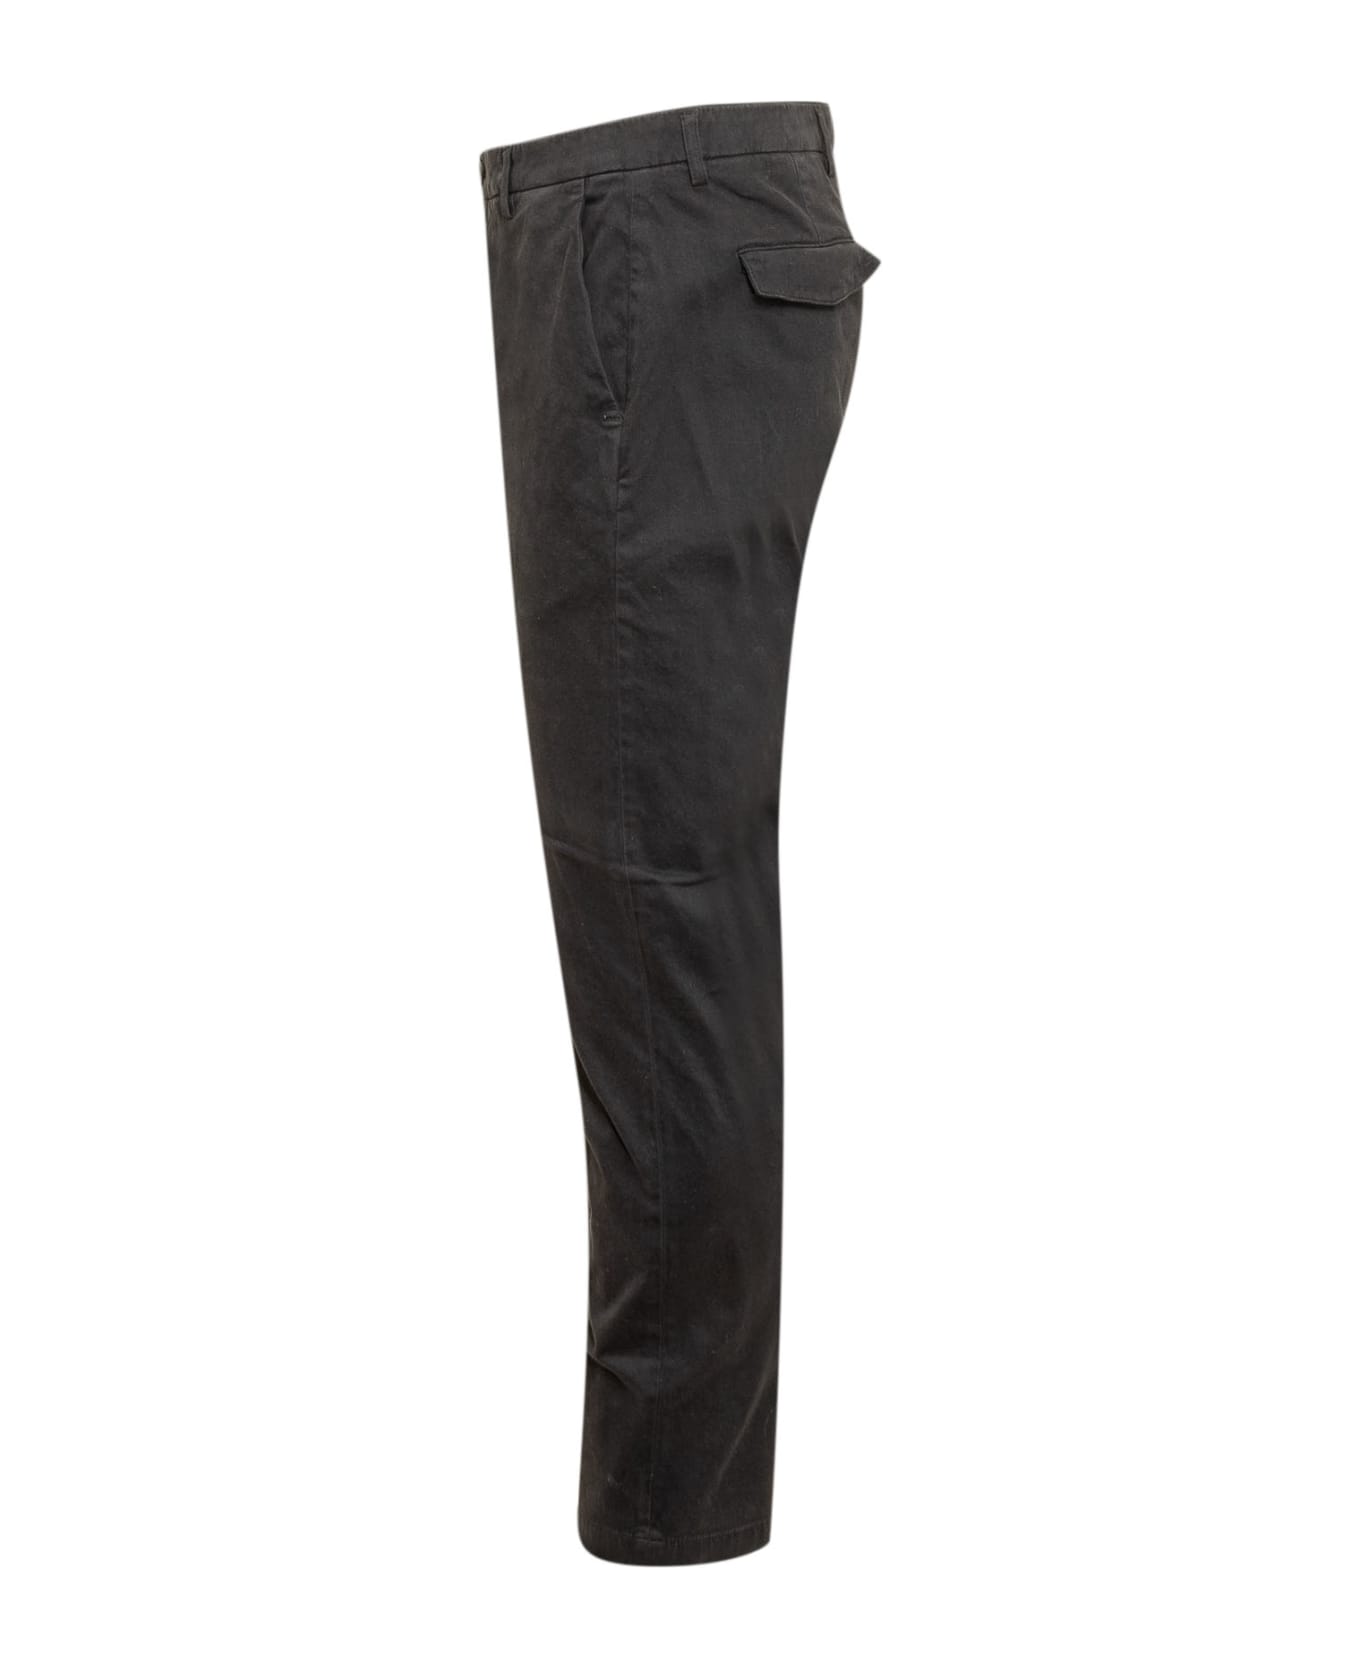 Department Five Prince Trousers Chinos - NERO ボトムス